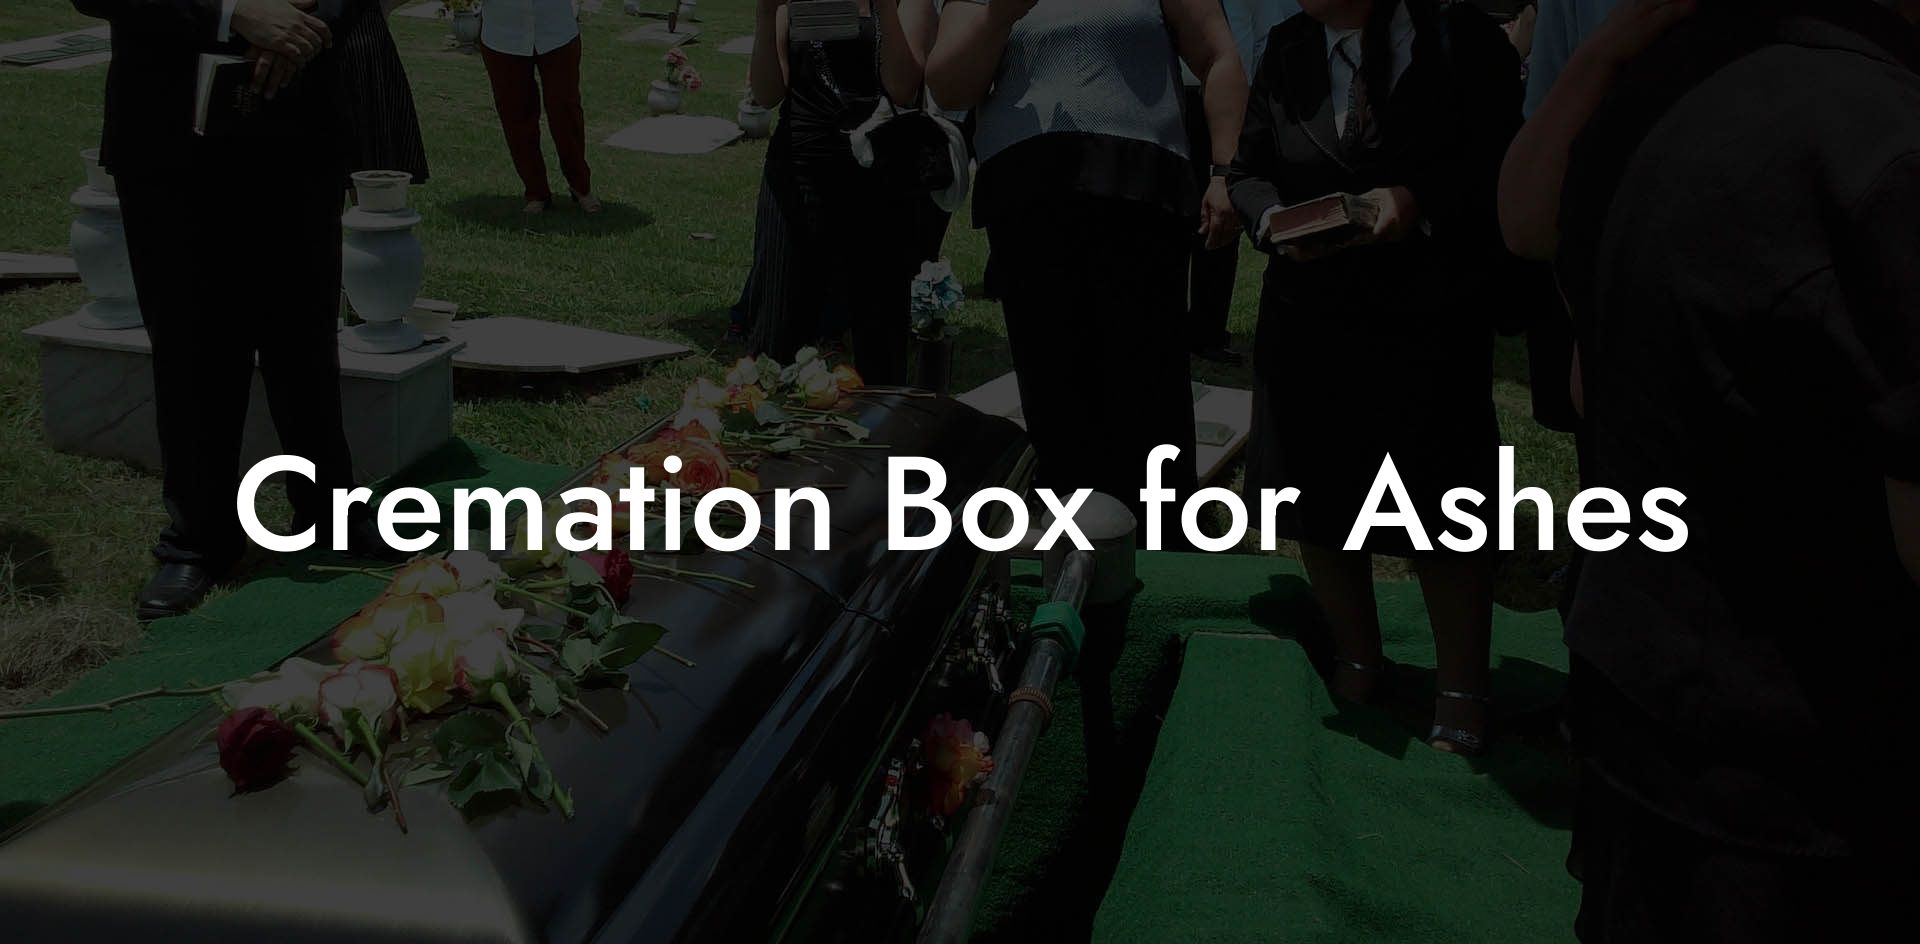 Cremation Box for Ashes